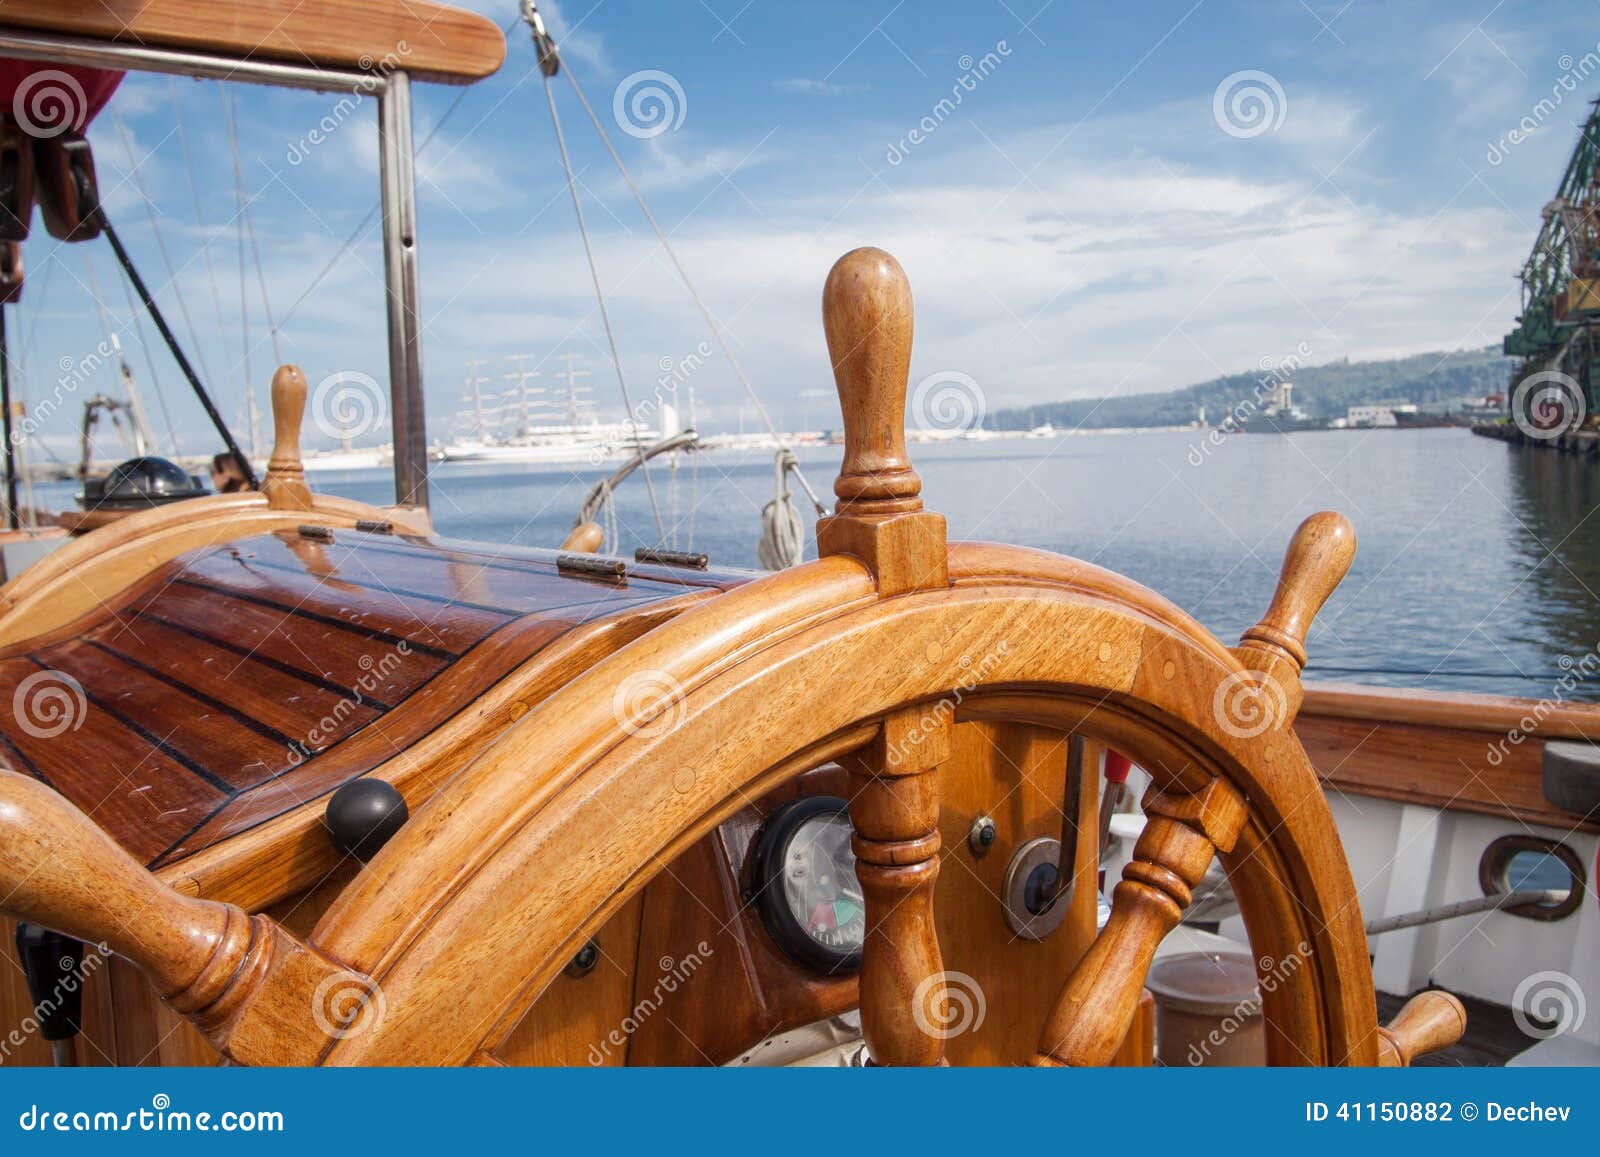 Old Boat Steering Wheel From Wood Stock Photo - Image 